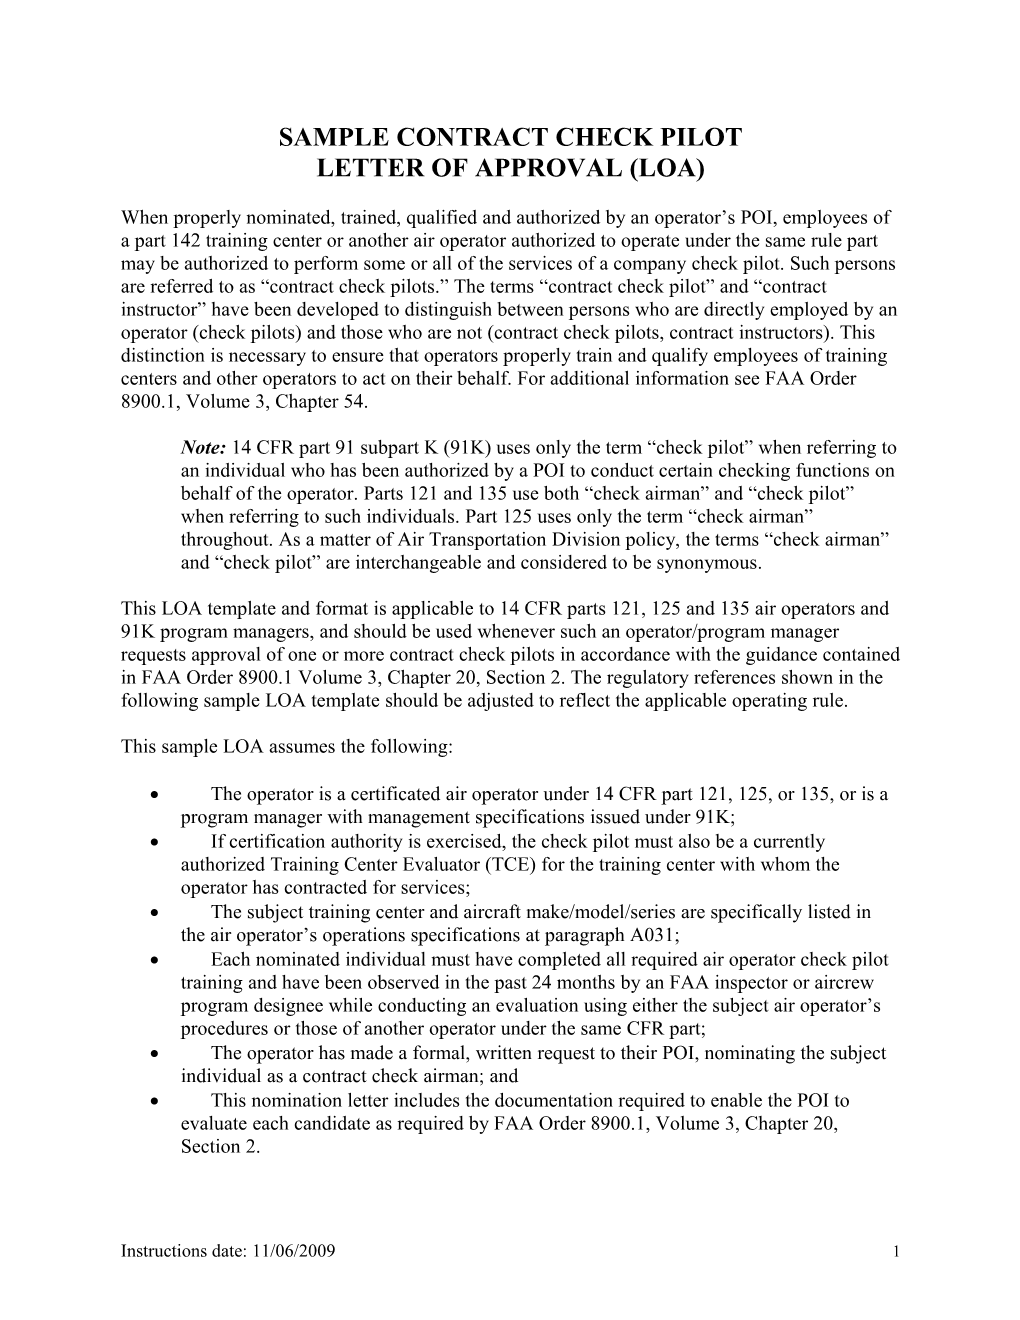 Sample Contract Check Pilot Letter of Approval (LOA)